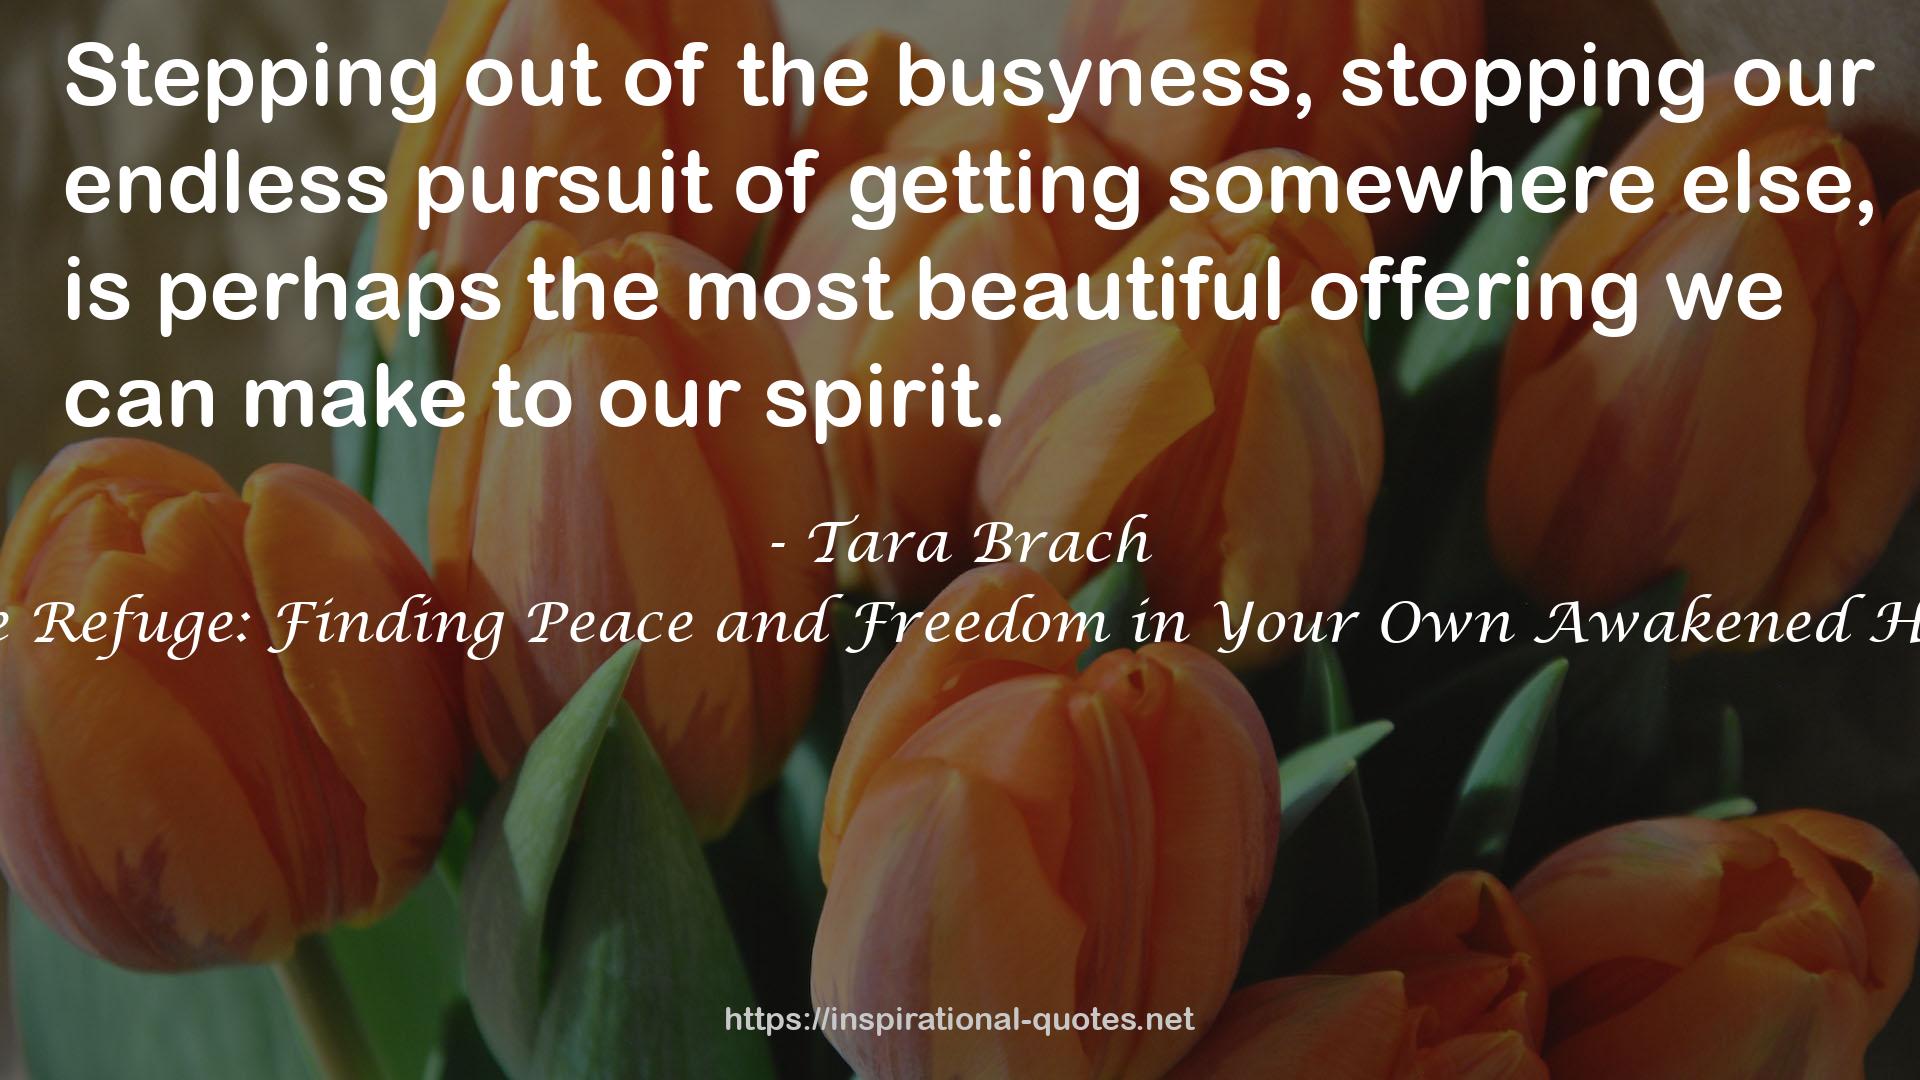 True Refuge: Finding Peace and Freedom in Your Own Awakened Heart QUOTES